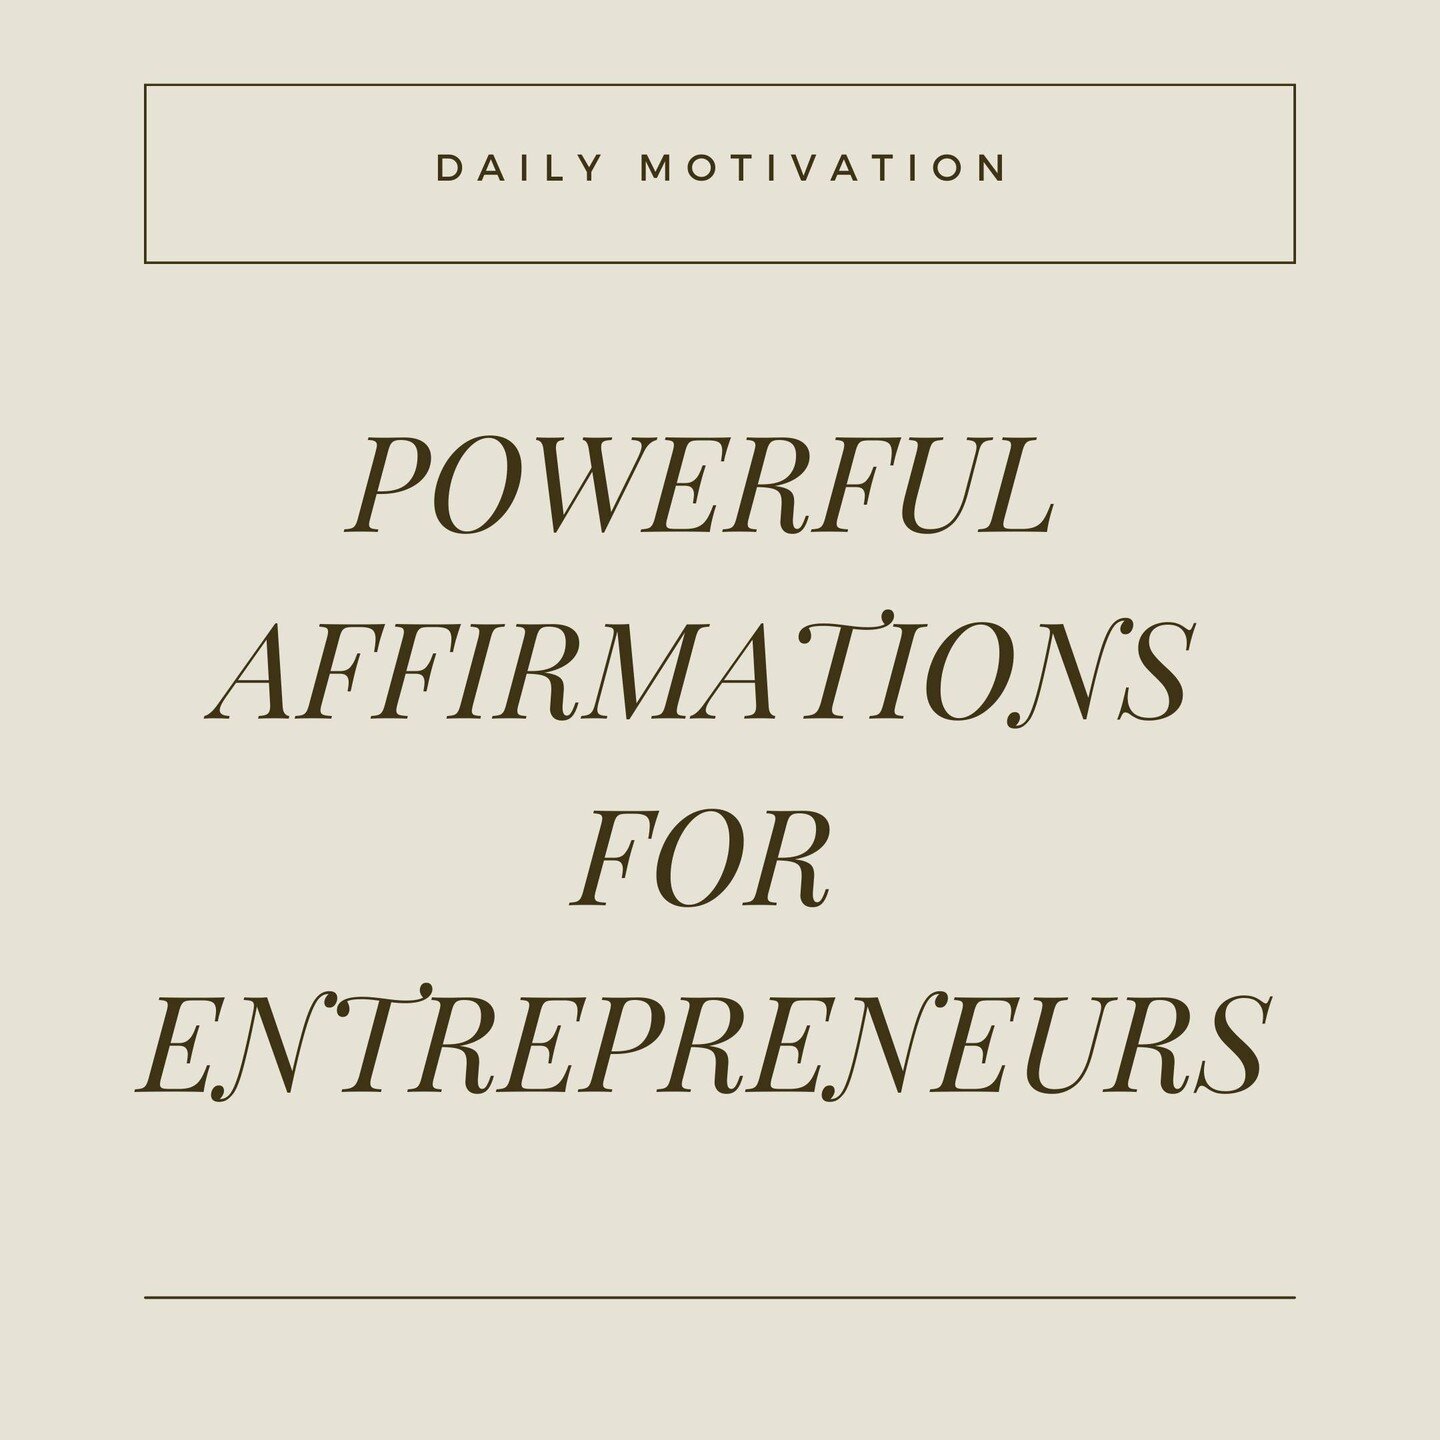 Here are some powerful affirmations for entrepreneurs and small business owners to keep you motivated and inspired:⁠
⁠
I am on the right track. ⁠
My hard work is paying off.⁠
I'm exactly where I need to be. ⁠
I trust that my business is able to succe